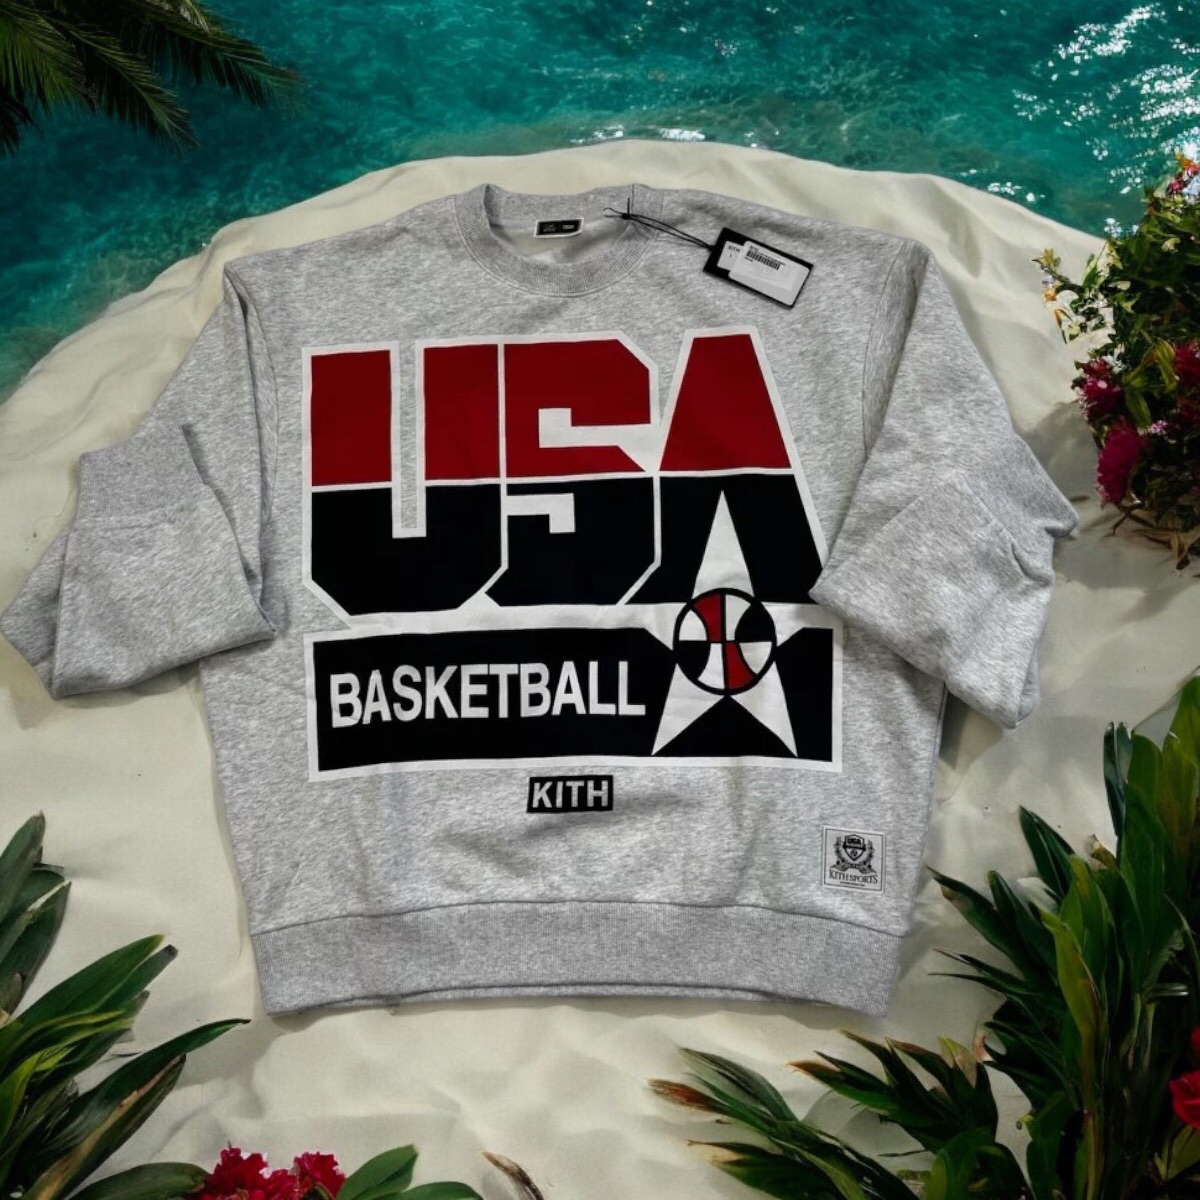 Sold Out! Large KITH x USA Basketball Legend Vintage Nelson Crewneck 24’ In Hand – $285